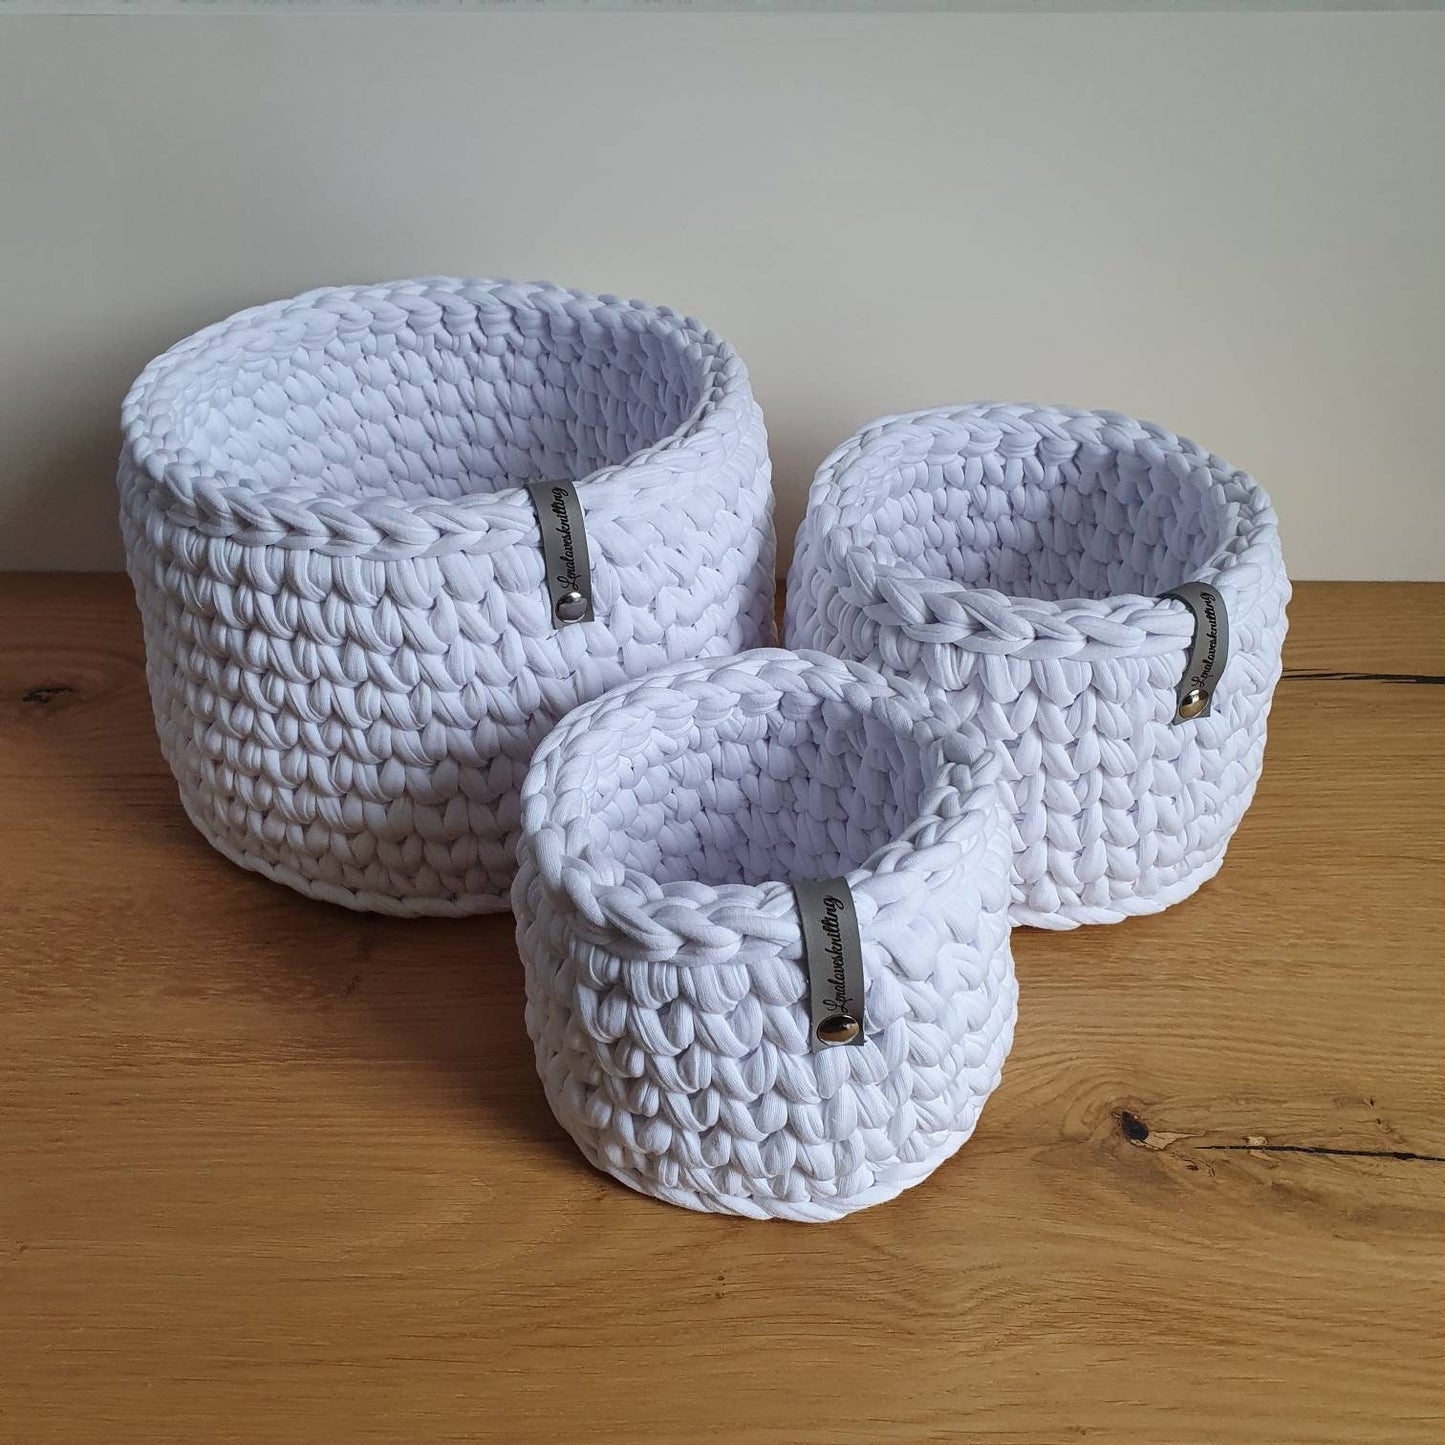 Set of 3 baskets crocheted from the textile yarn Ideal for the changing table